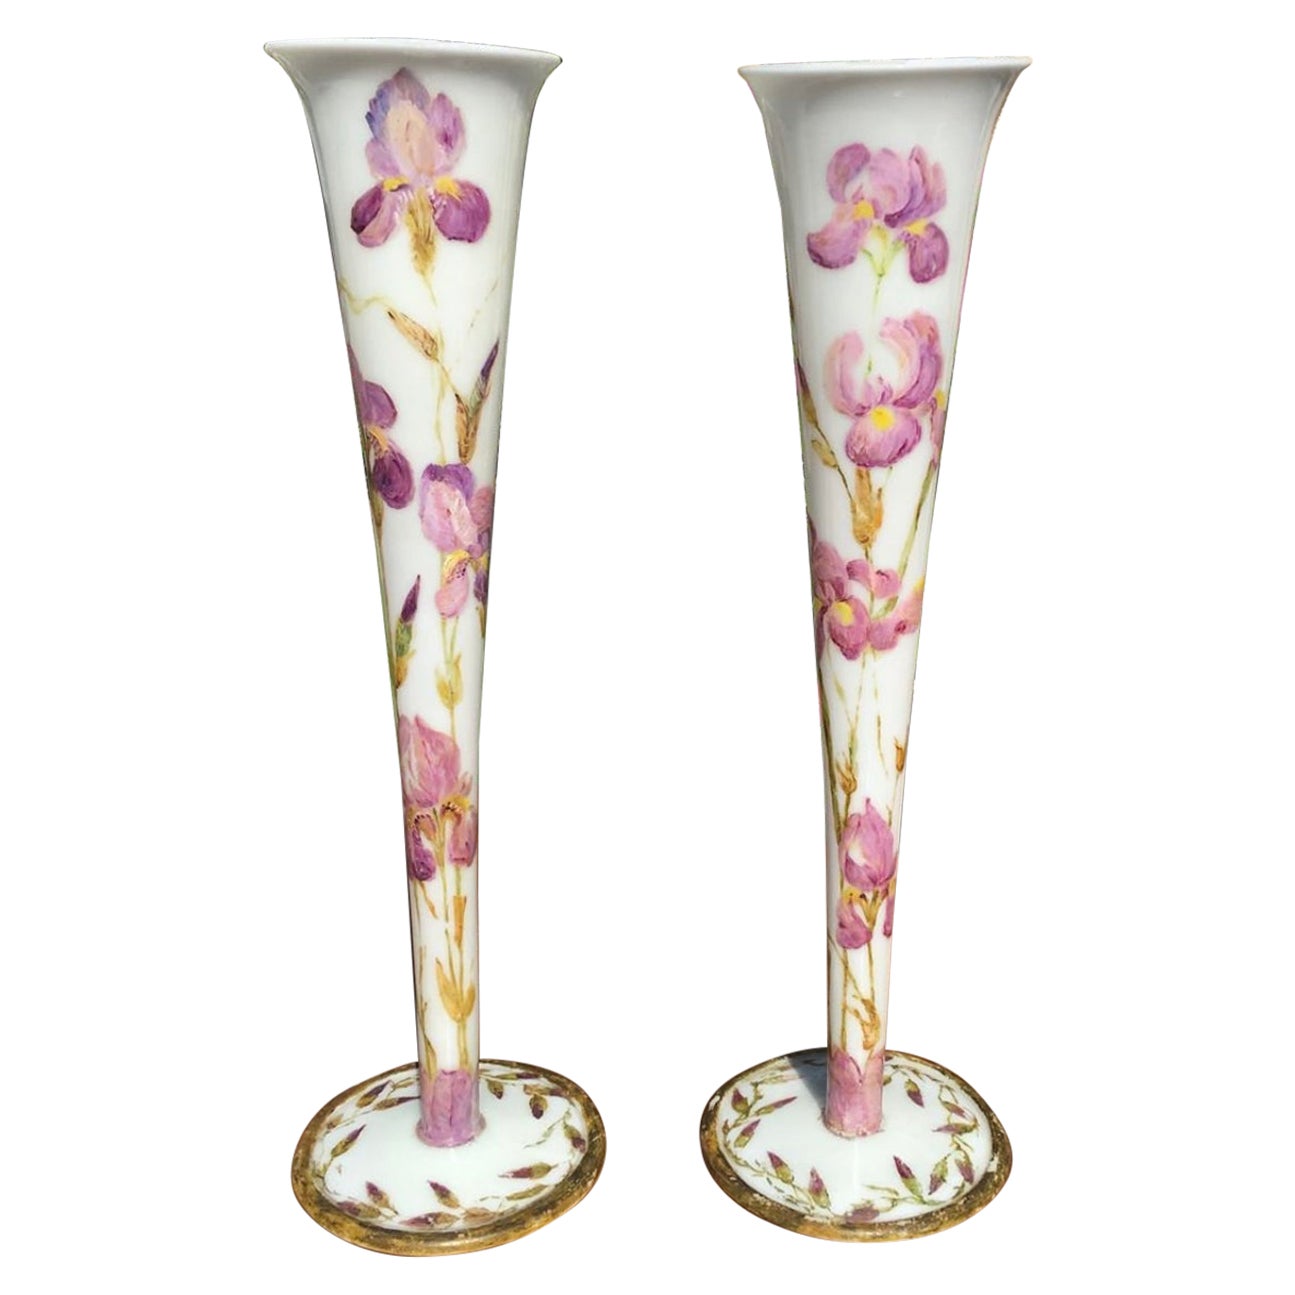 Pair of Large of Opaline Vases Decorated with Iris, 20th Century